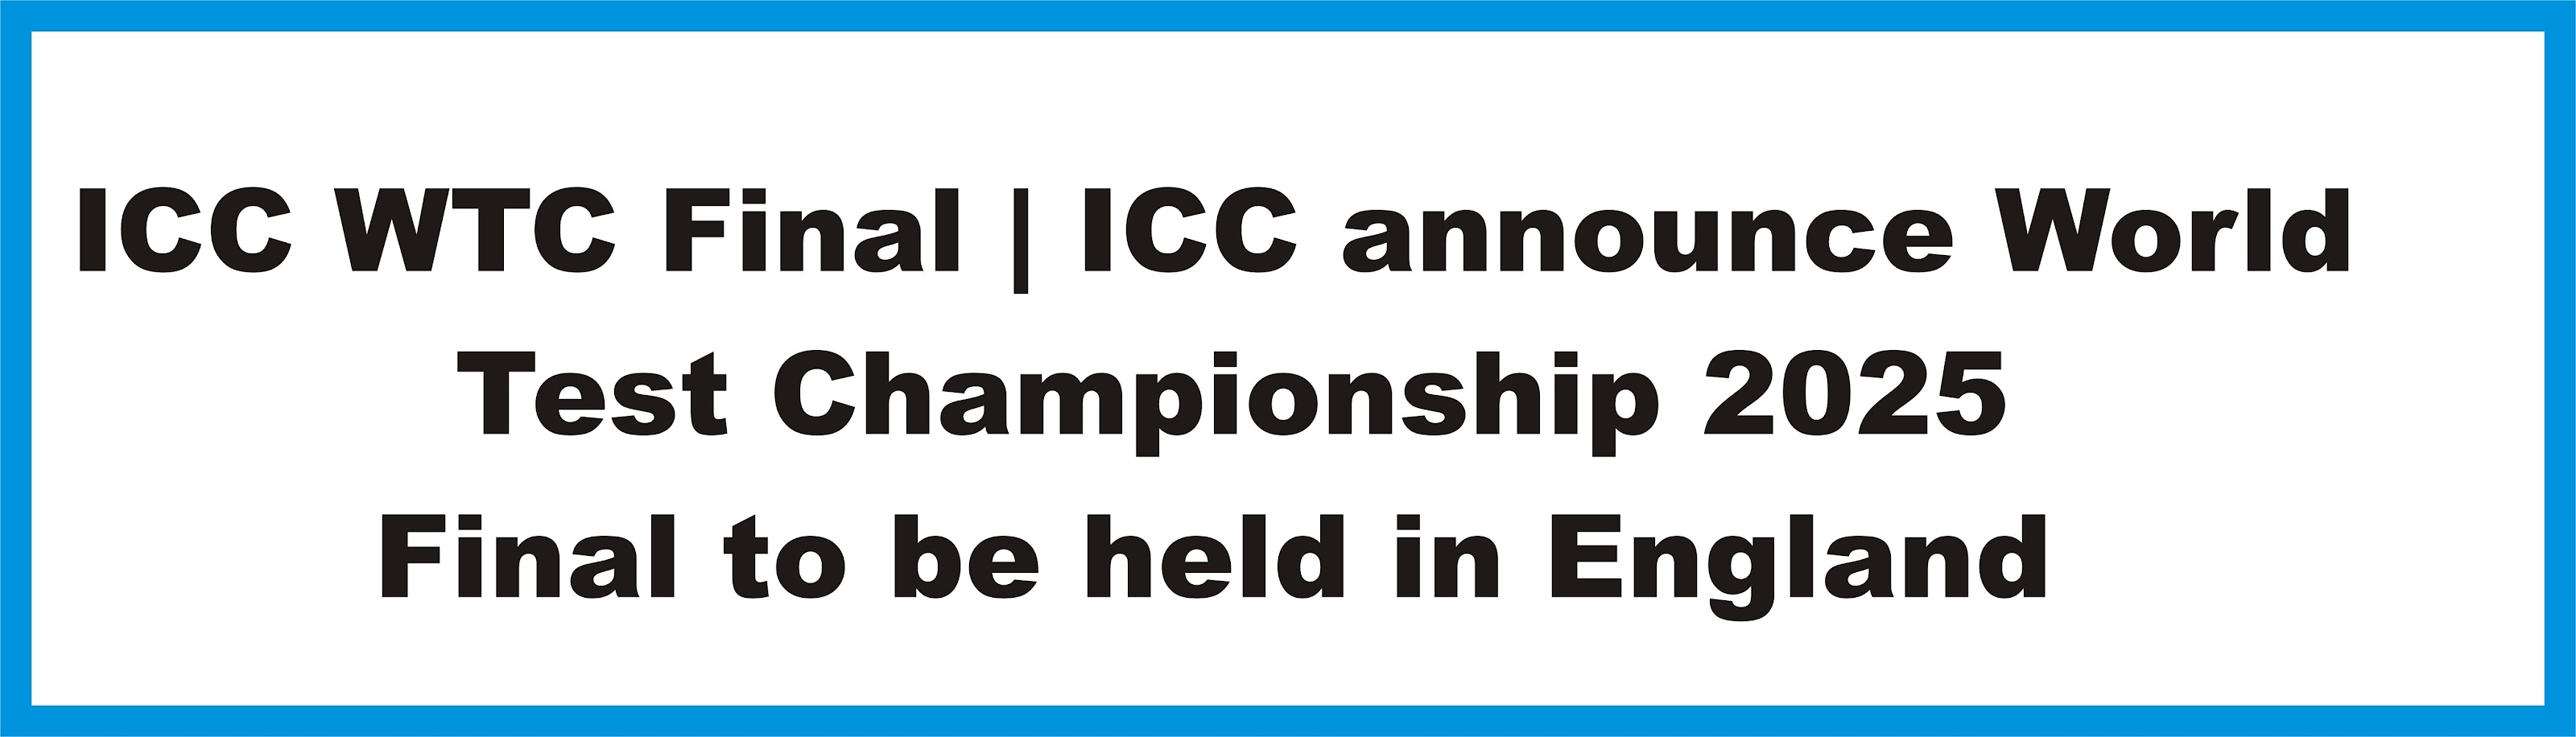 ICC WTC Final | ICC announce World Test Championship 2025 Final to be held in England